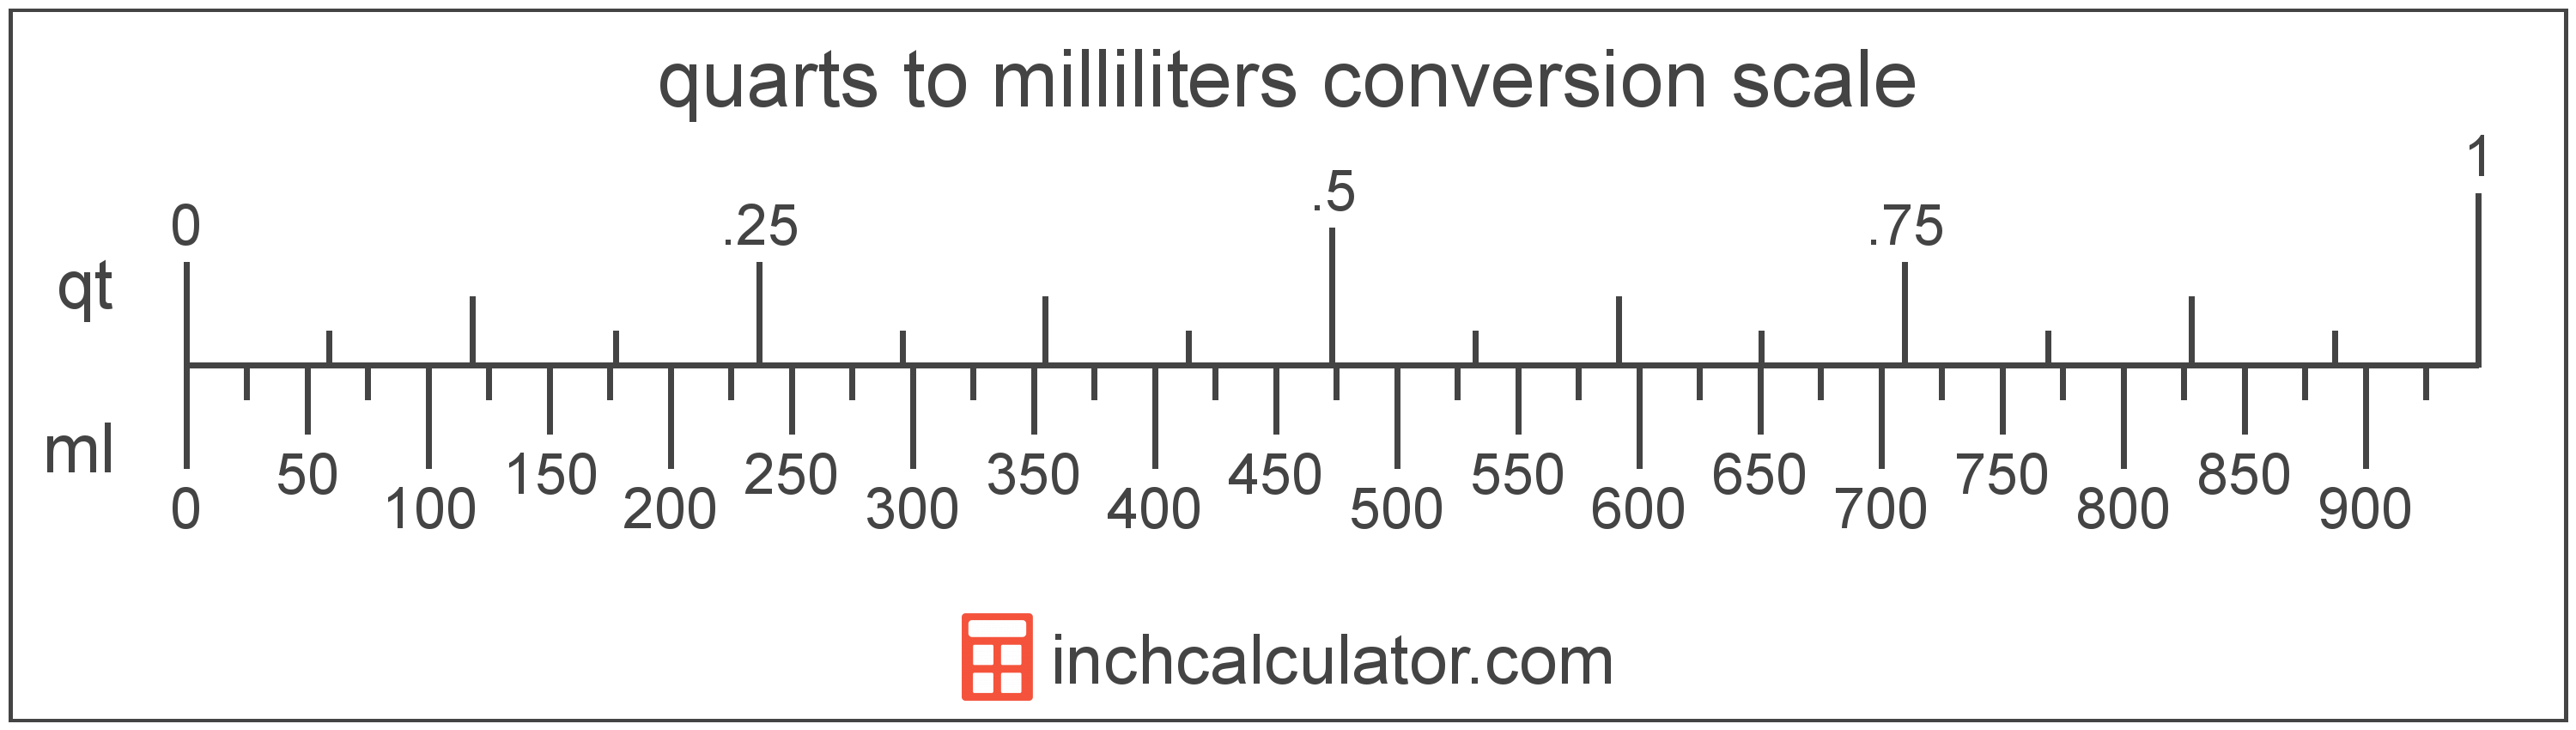 conversion scale showing milliliters and equivalent quarts volume values